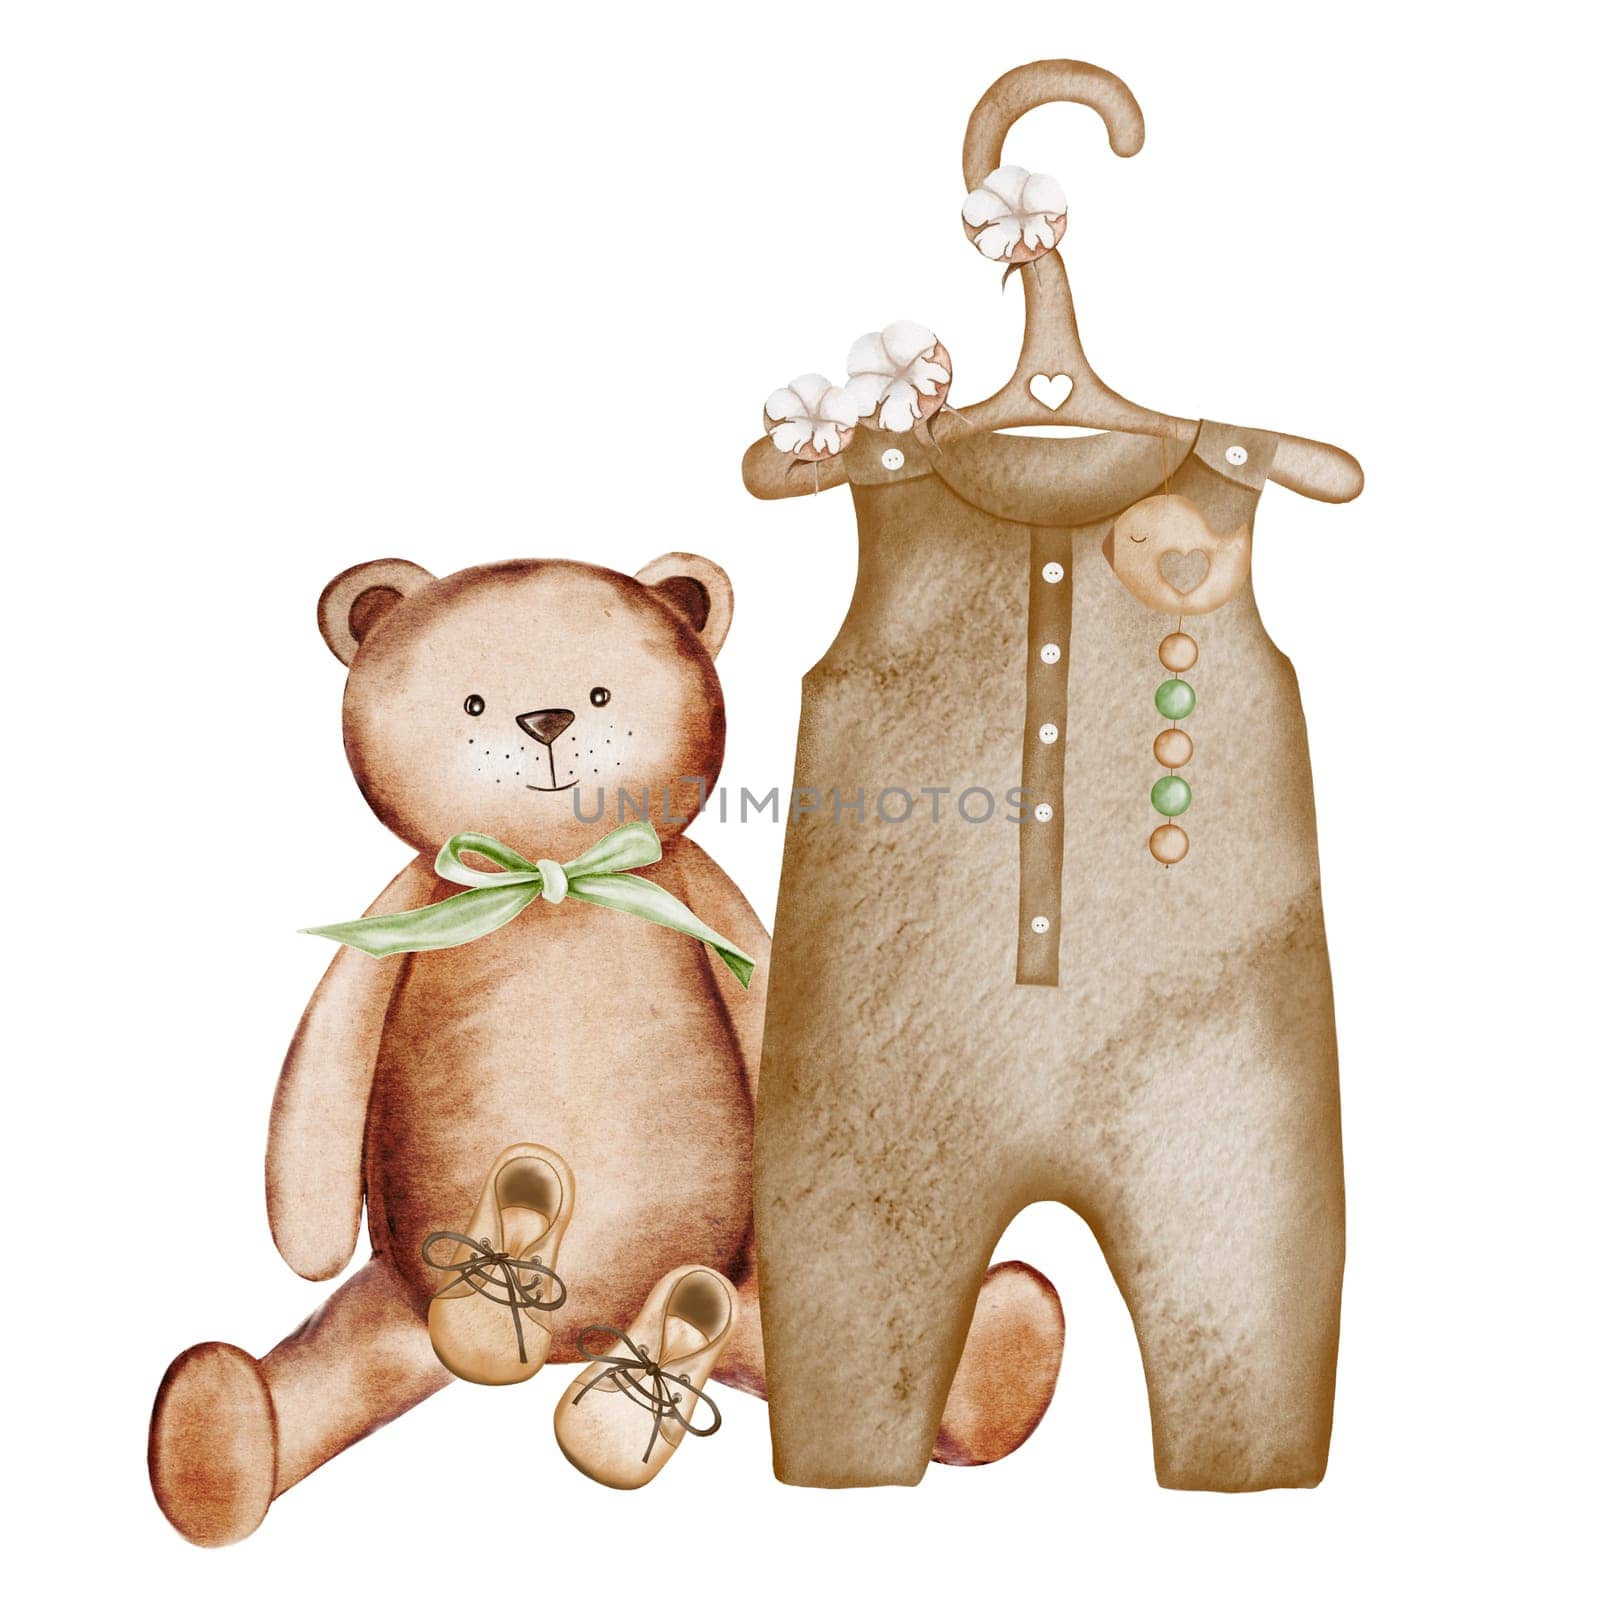 Cute baby shower watercolor invitation card. Composition of children's clothes on a hanger, a teddy bear and boots. Ideal for baby shower cards, clothing store tags, logos by TatyanaTrushcheleva